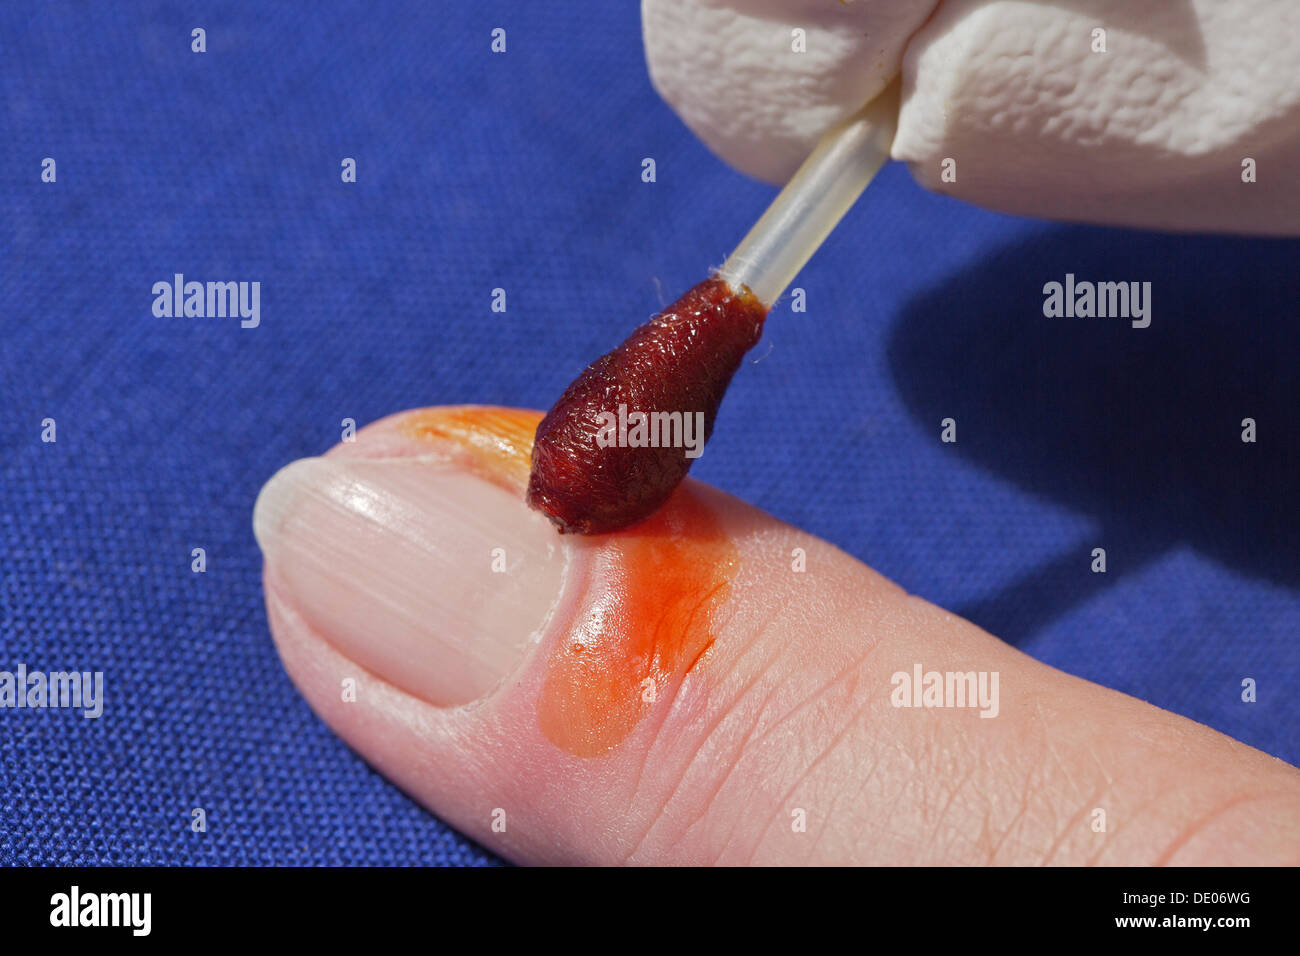 Bacterial infection, inflammation, index finger, disinfecting a wound Stock Photo